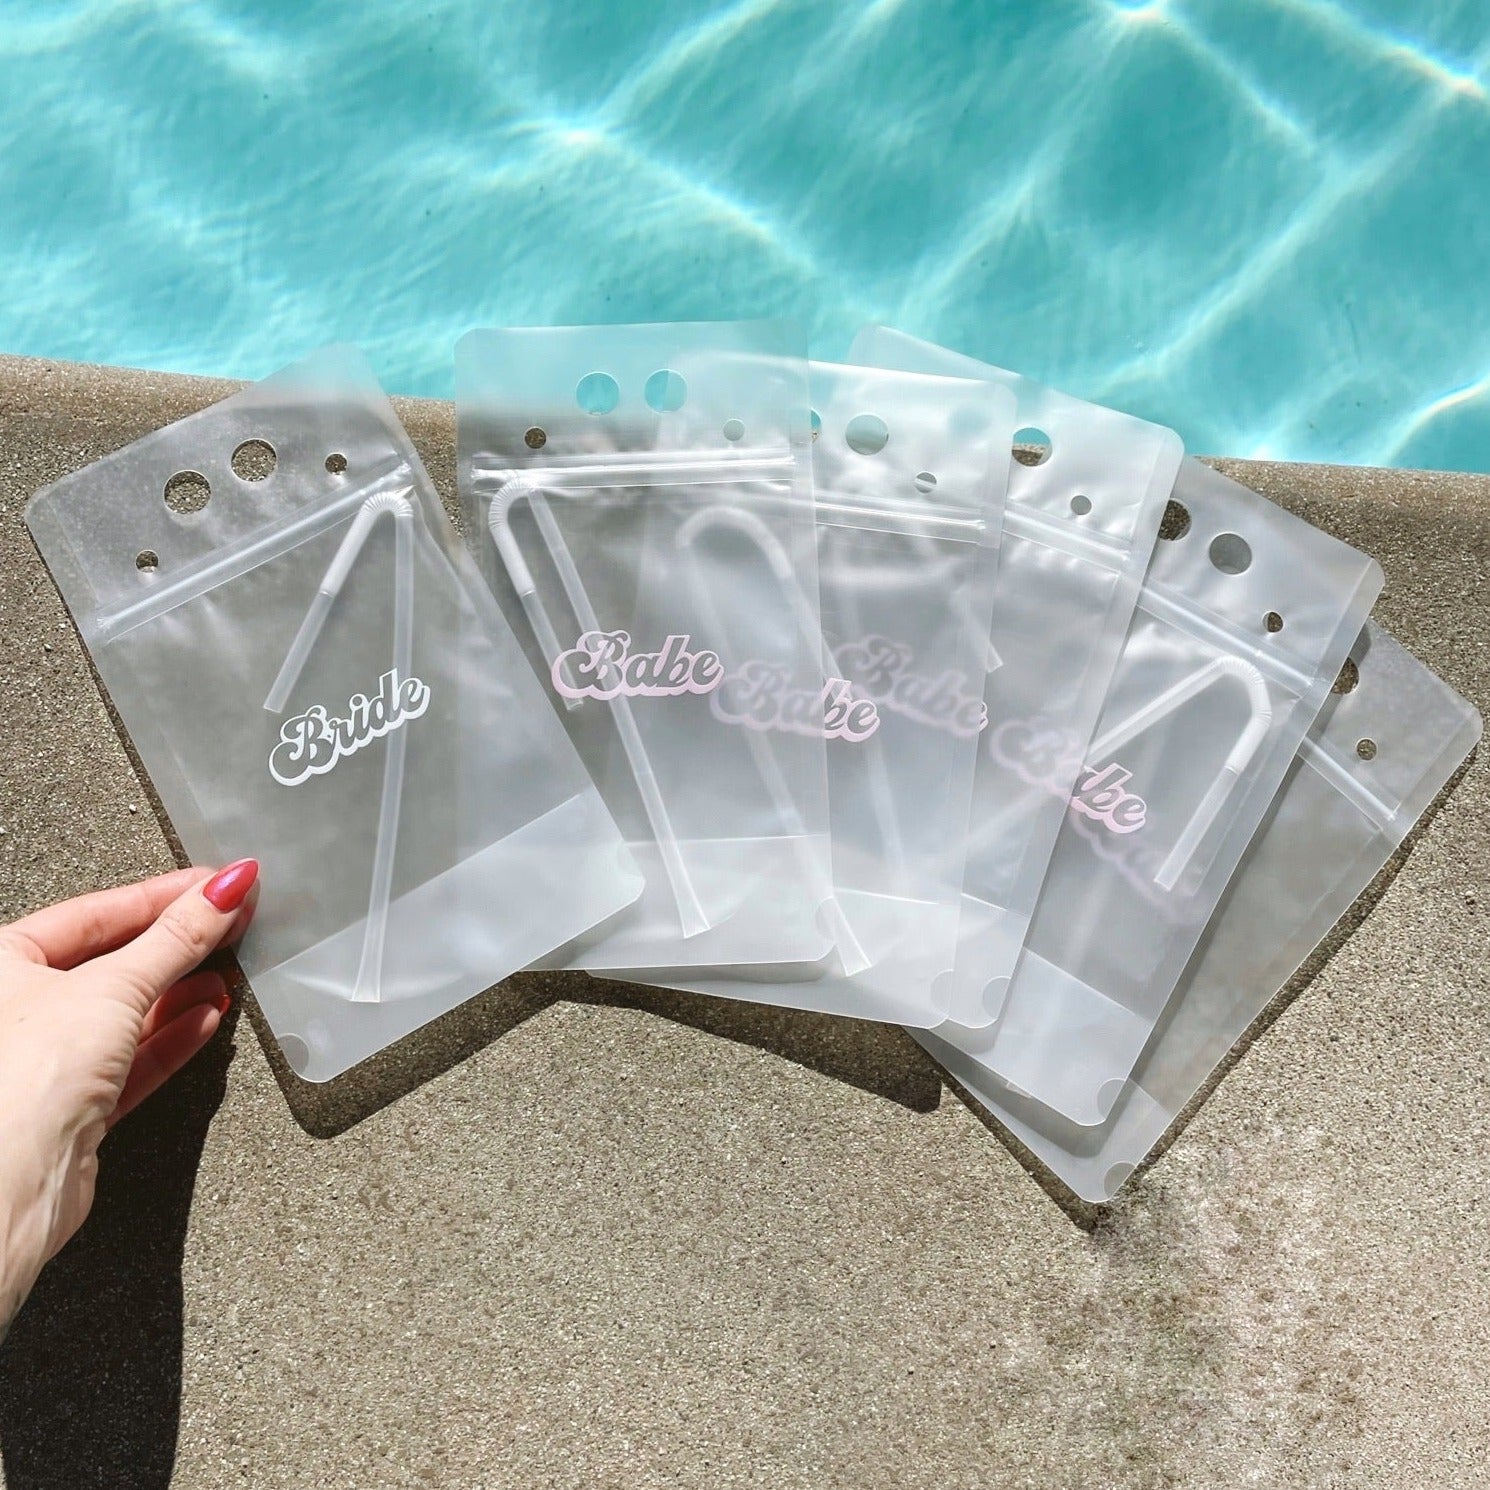 A woman&#39;s hand touching a transparent drink pouch that has cursive lettering on the front that reads &quot;Bride&quot; in white text. Next to that pouch are 5 identical pouches that say &quot;Babe&quot; in light pink text across the front. All 6 pouches are laying next to a pool of water.